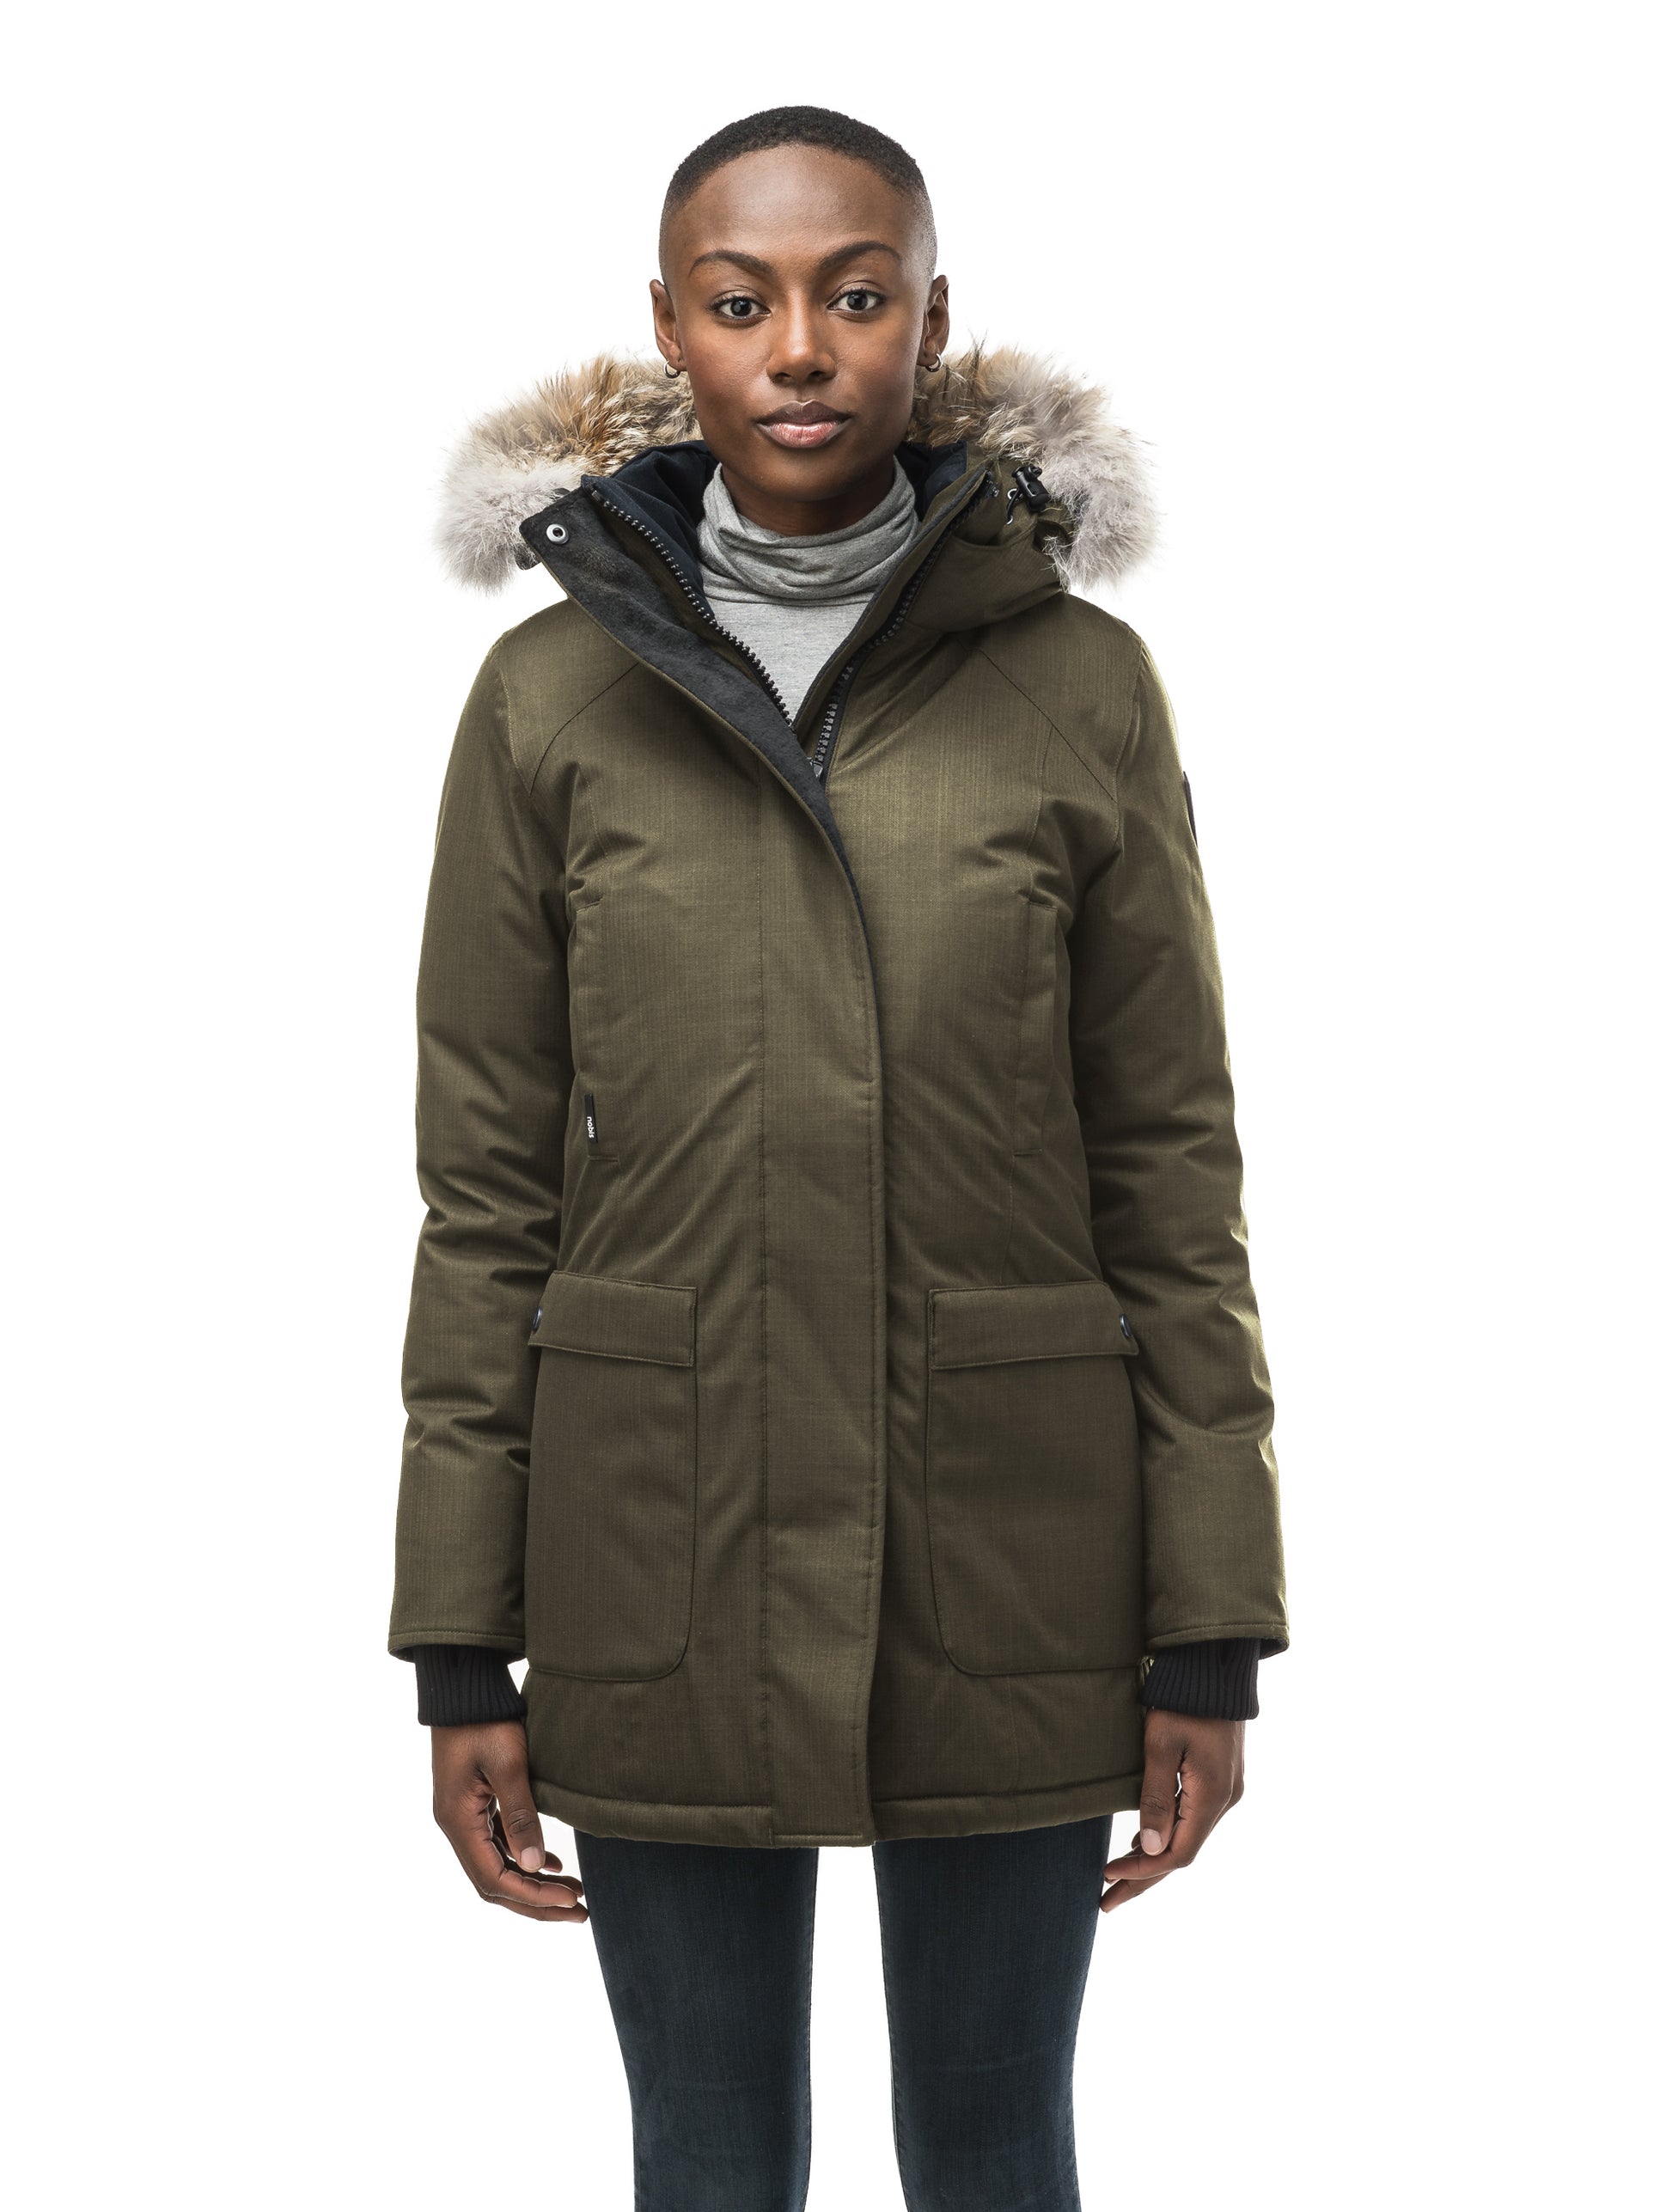 Women's down filled parka that sits just below the hip with a clean look and two hip patch pockets in CH Army Green